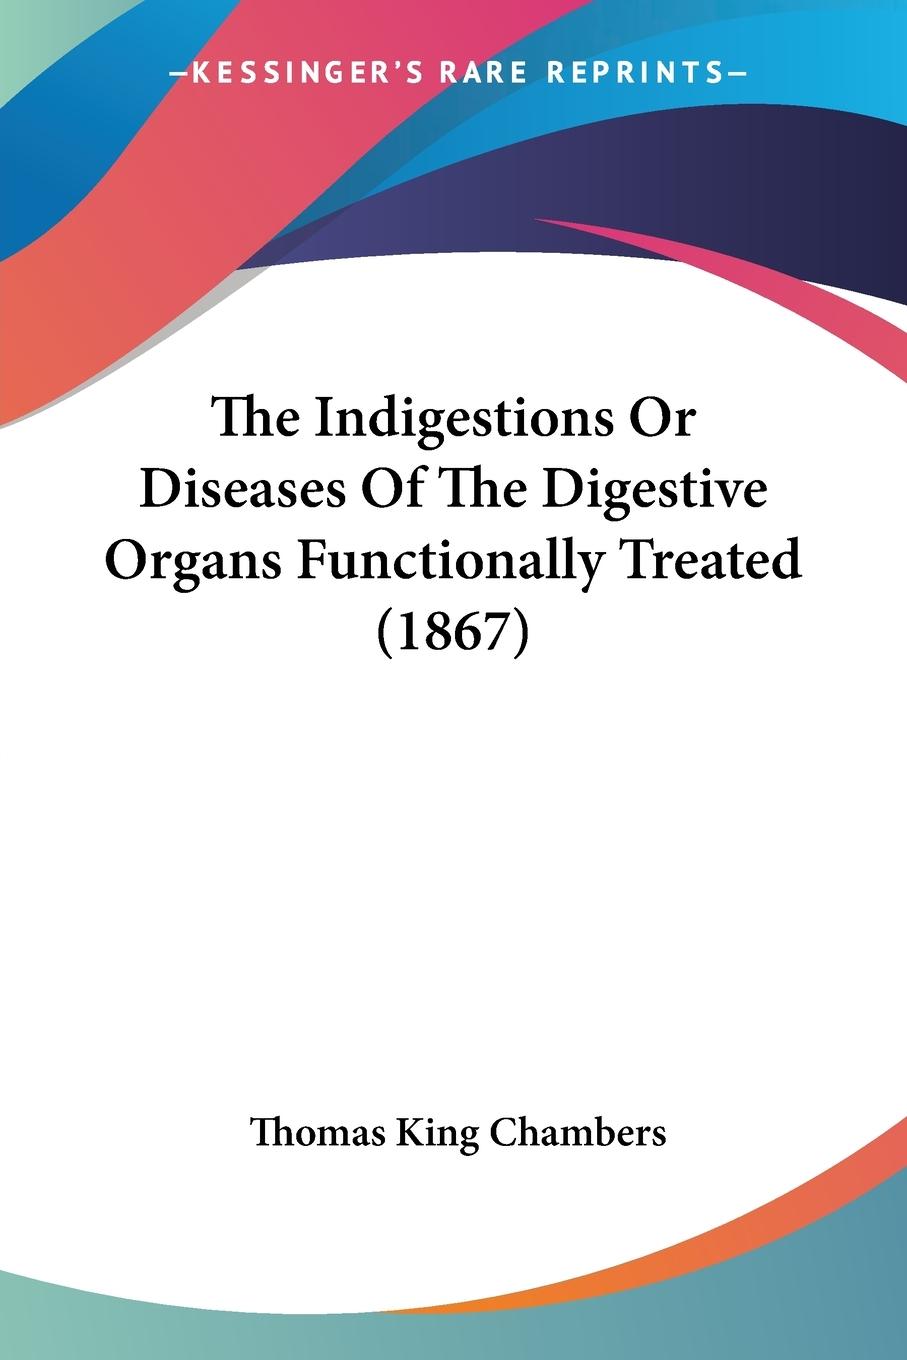 The Indigestions Or Diseases Of The Digestive Organs Functionally Treated (1867) - Chambers, Thomas King